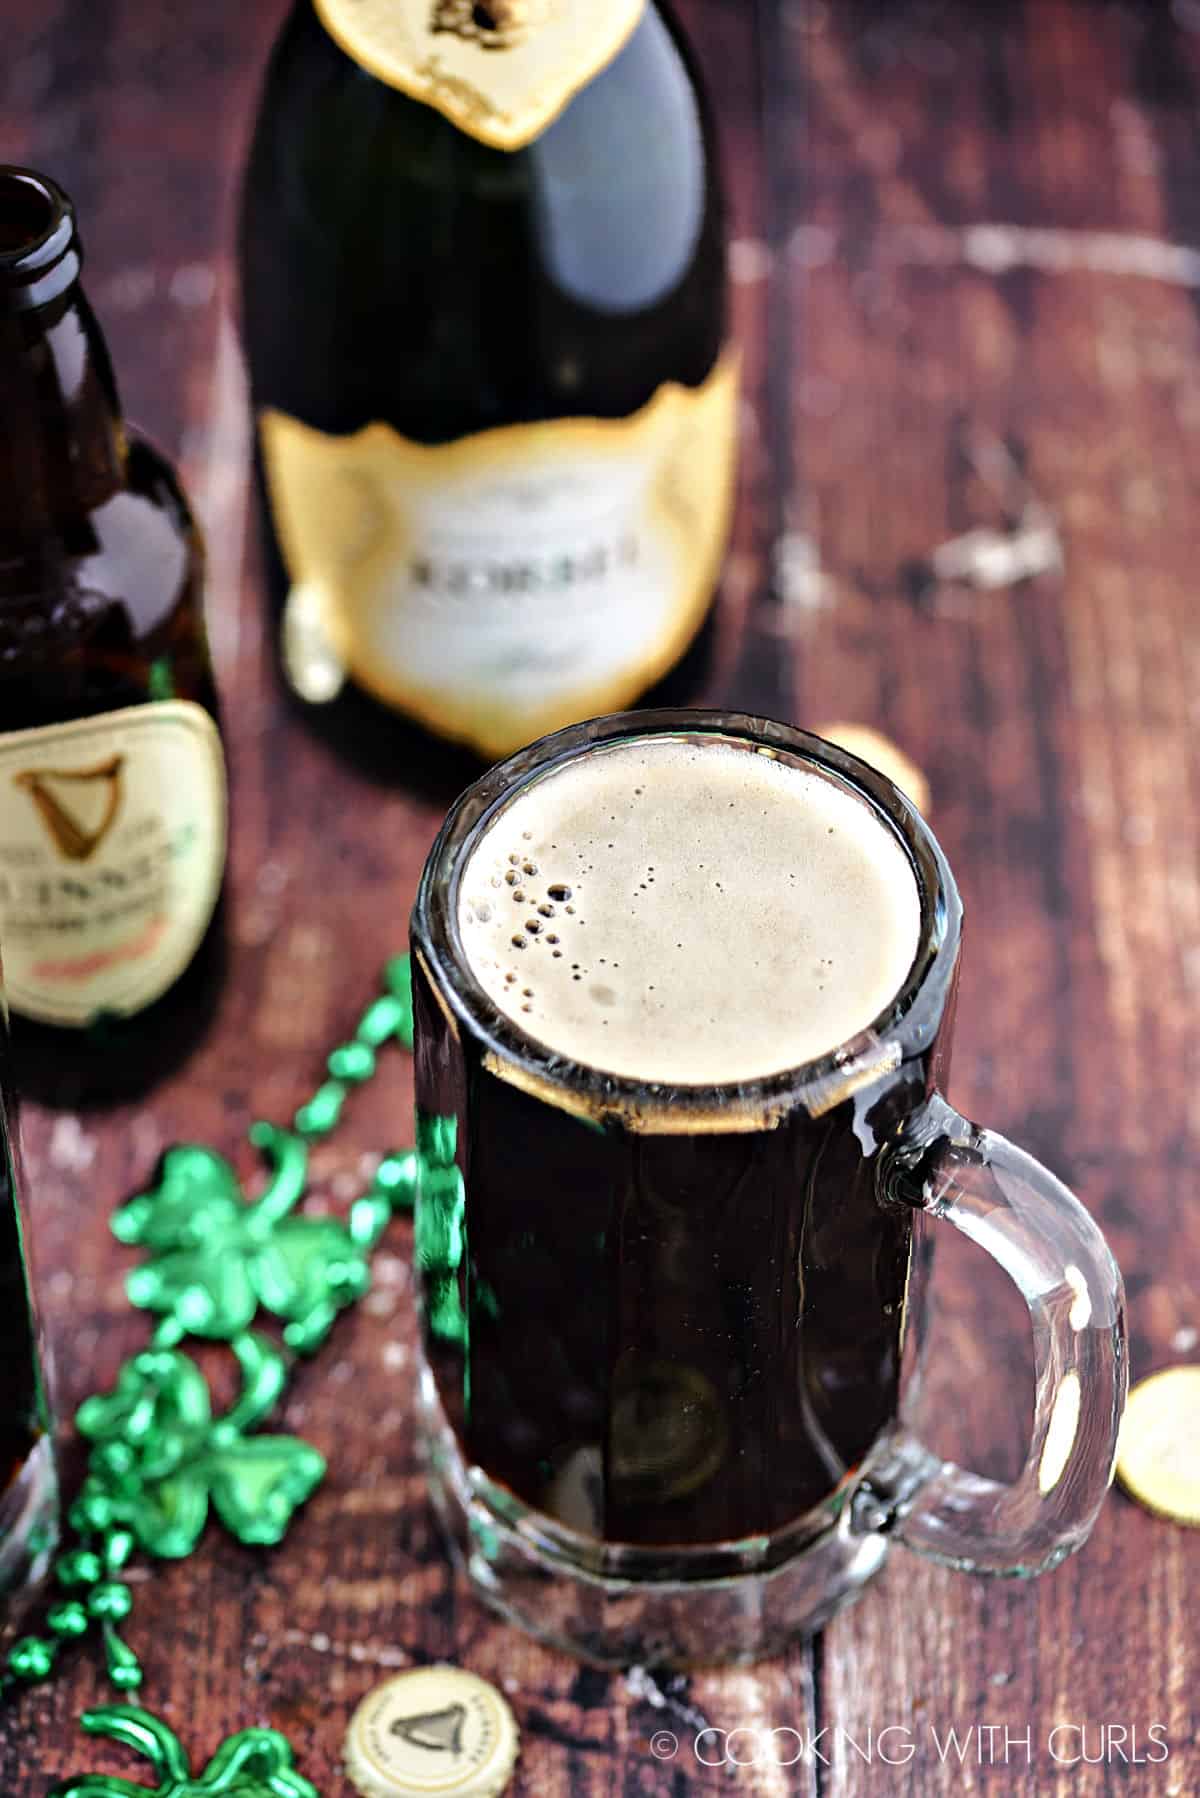 Foamy, black cocktail in a glass beer mug with bottles of Guinness and champagne in the background.